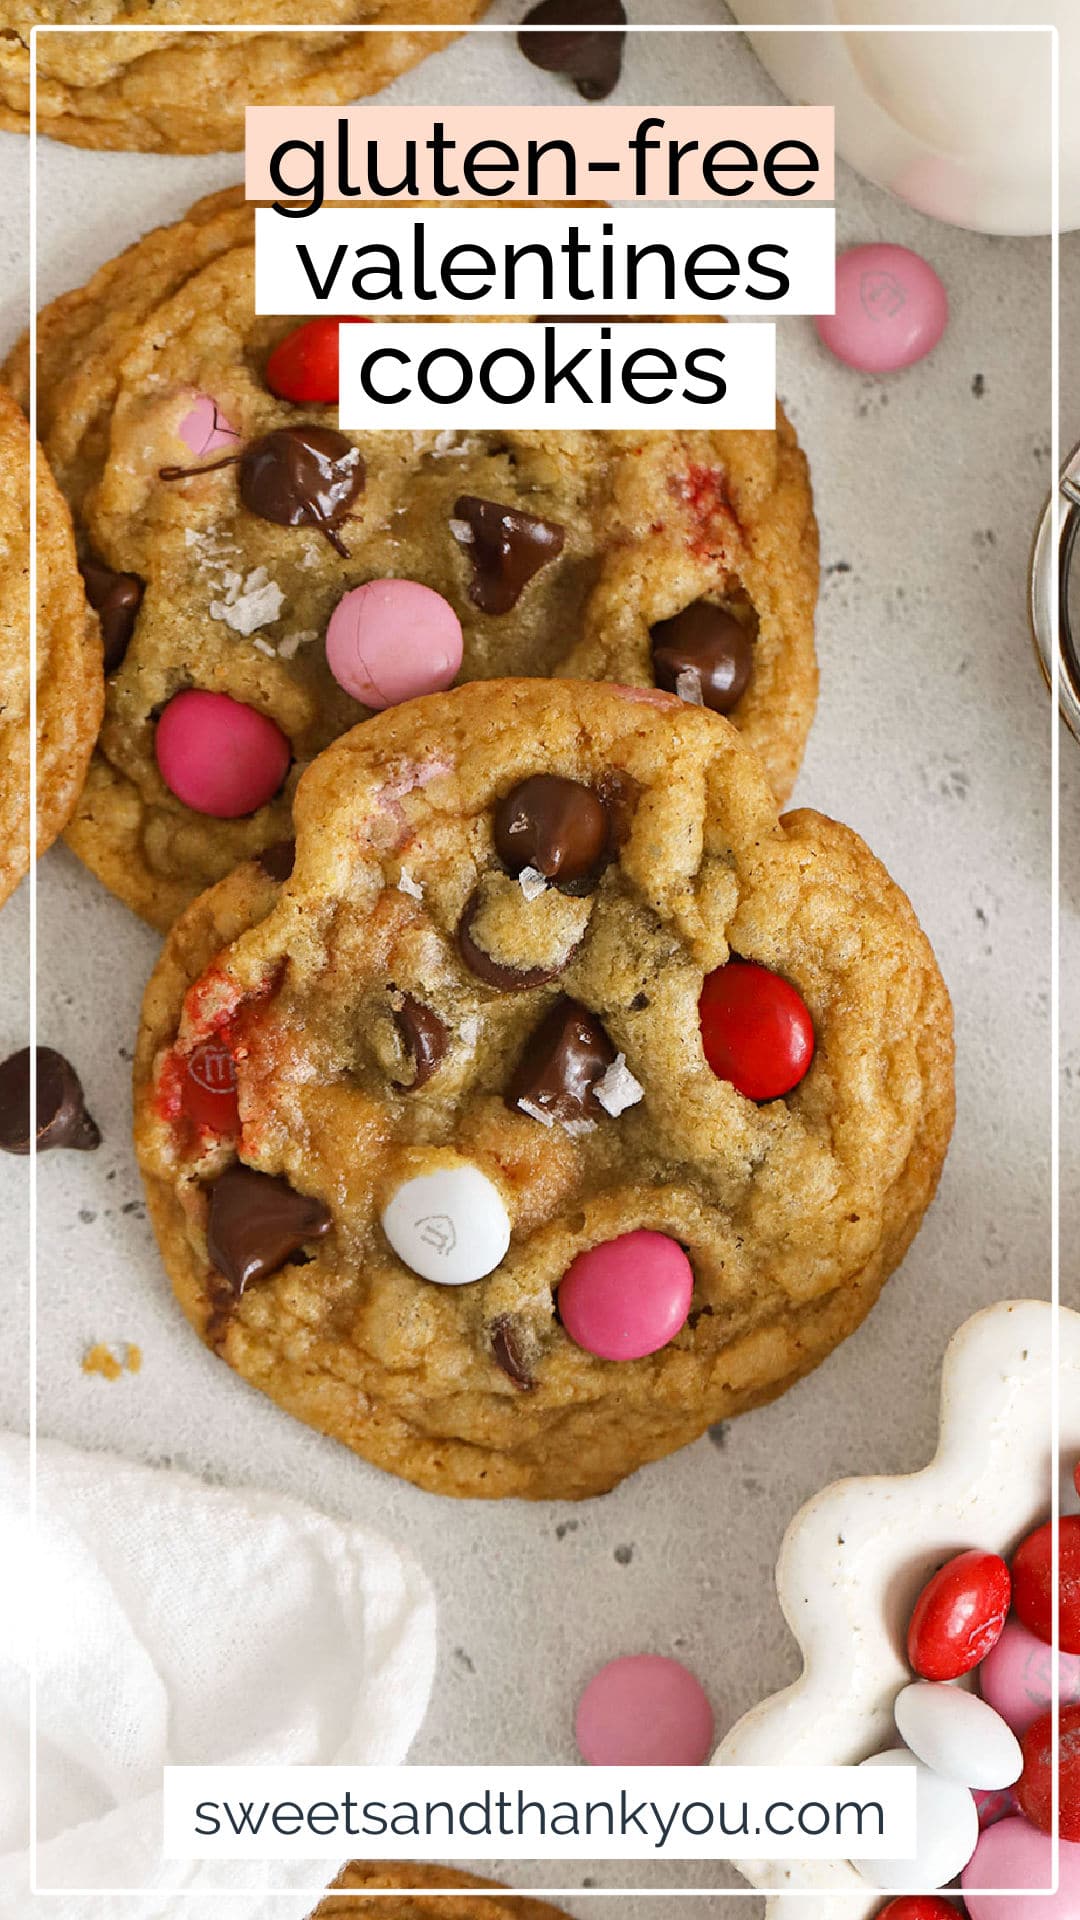 Our Gluten-Free Valentines Cookies recipe is a delightful sweet treat for a Valentine's day party or celebration. With a mix of chocolate chips & colorful M&Ms in every bite, these gluten-free Valentine's Day cookies are made from simple ingredients and add a cute, colorful touch to your holiday. (Don't miss our other favorite gluten-free Valentine's Day recipes to try in the post!)